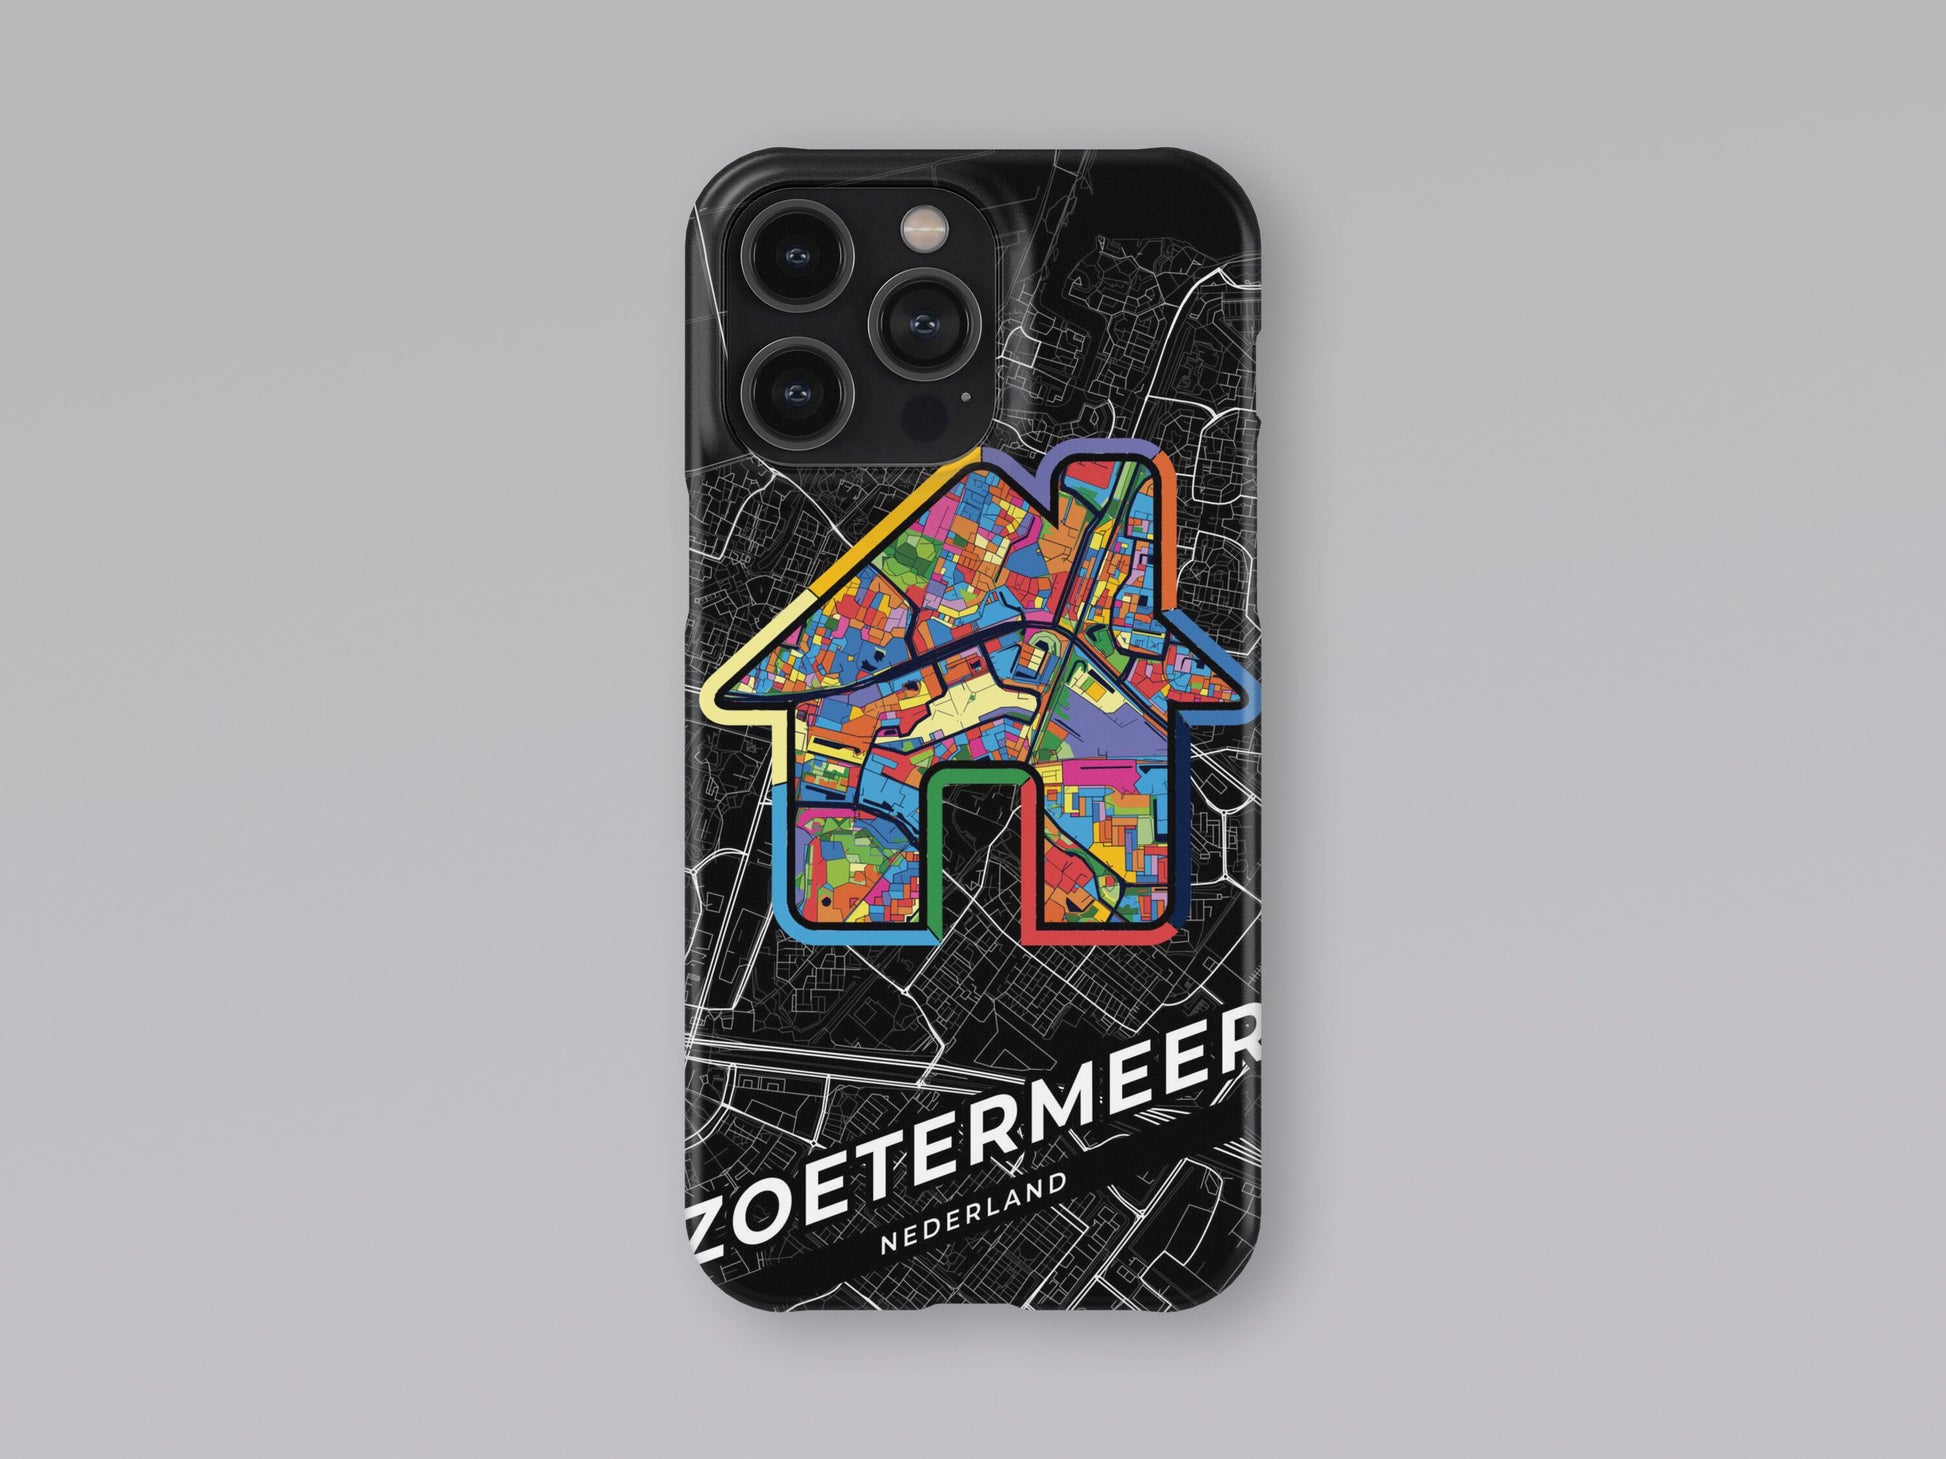 Zoetermeer Netherlands slim phone case with colorful icon 3